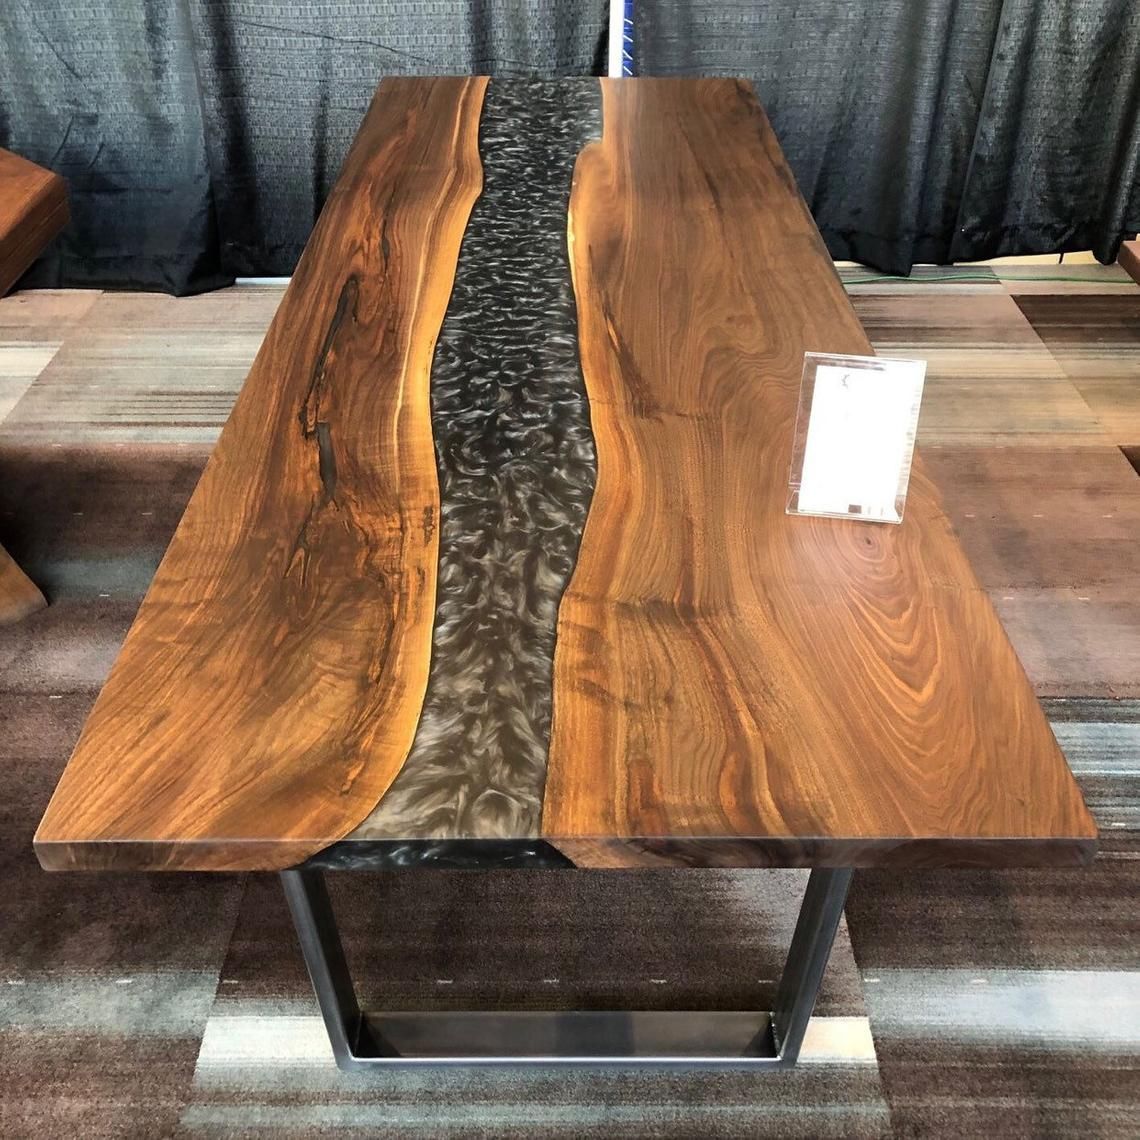 Black Walnut Resin River Table | Maxiwoods Throughout Most Recently Released Black And Walnut Dining Tables (View 5 of 15)